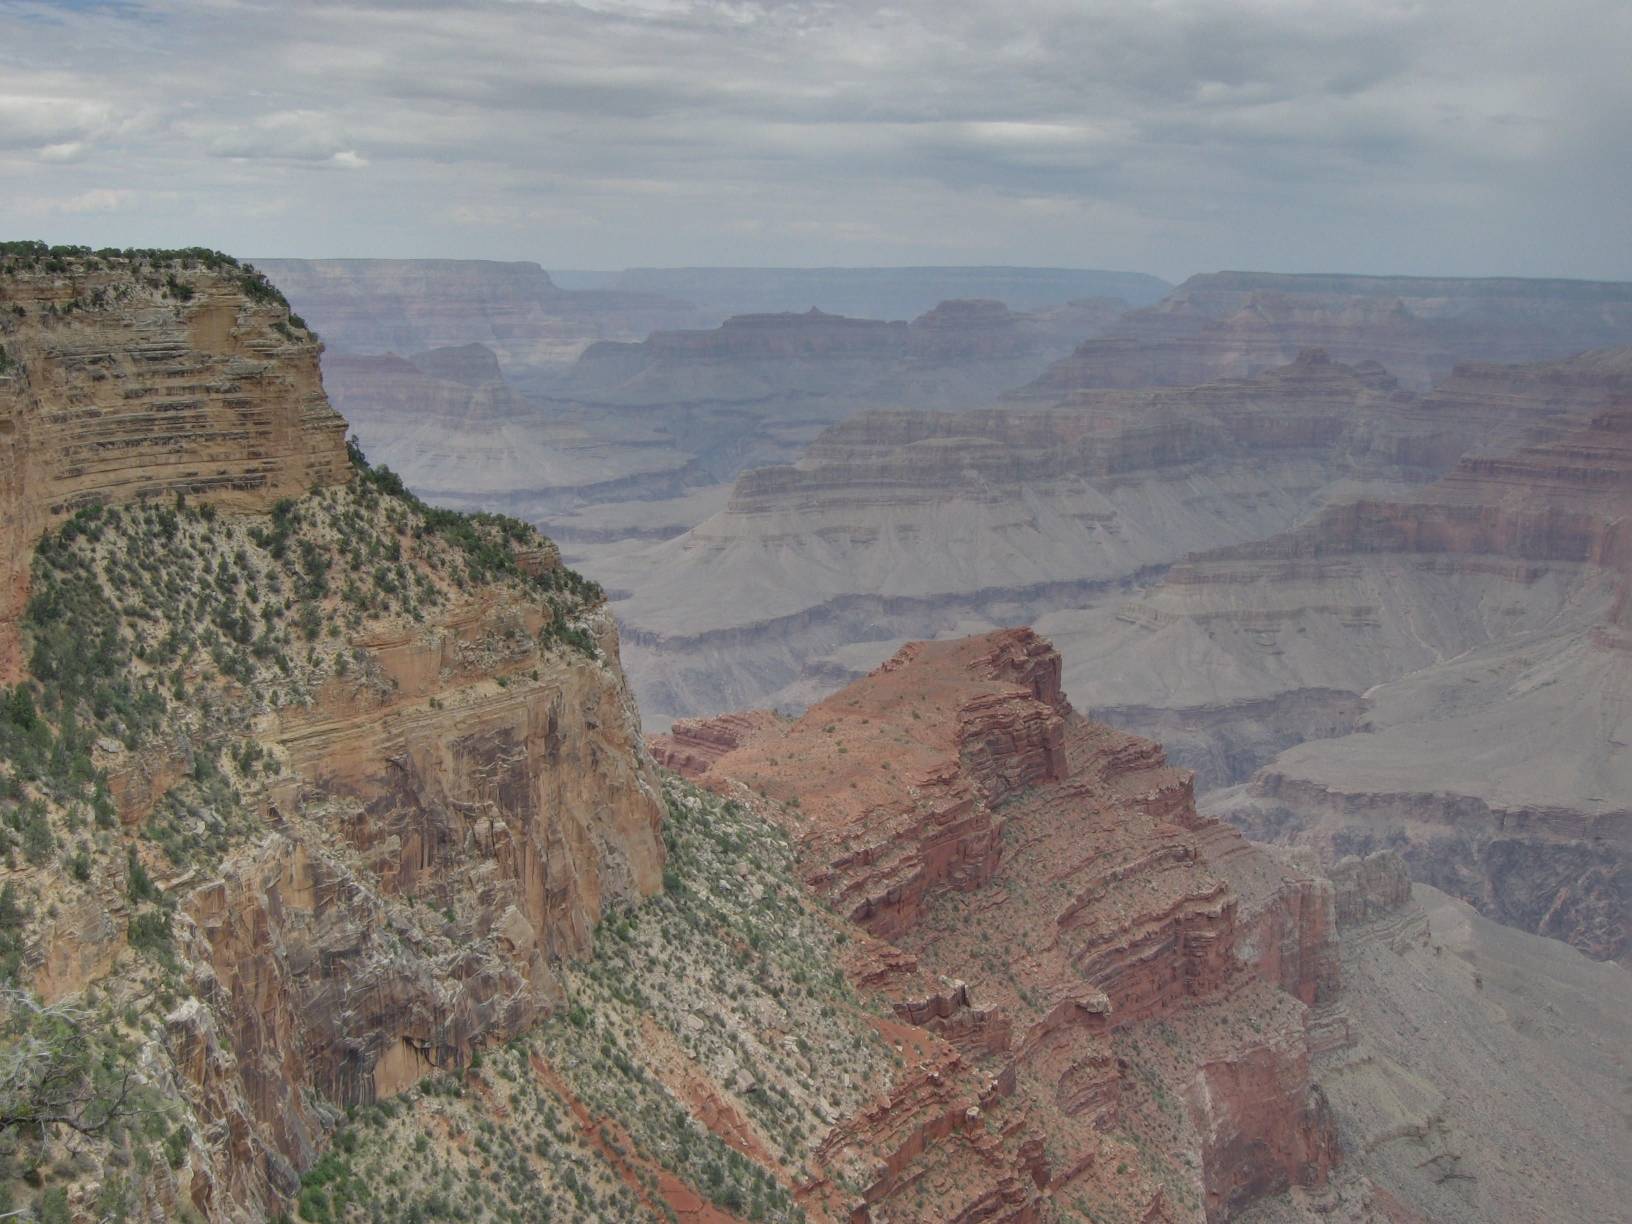 Image: The Grand Canyon as seen from the Hermit's Rest point